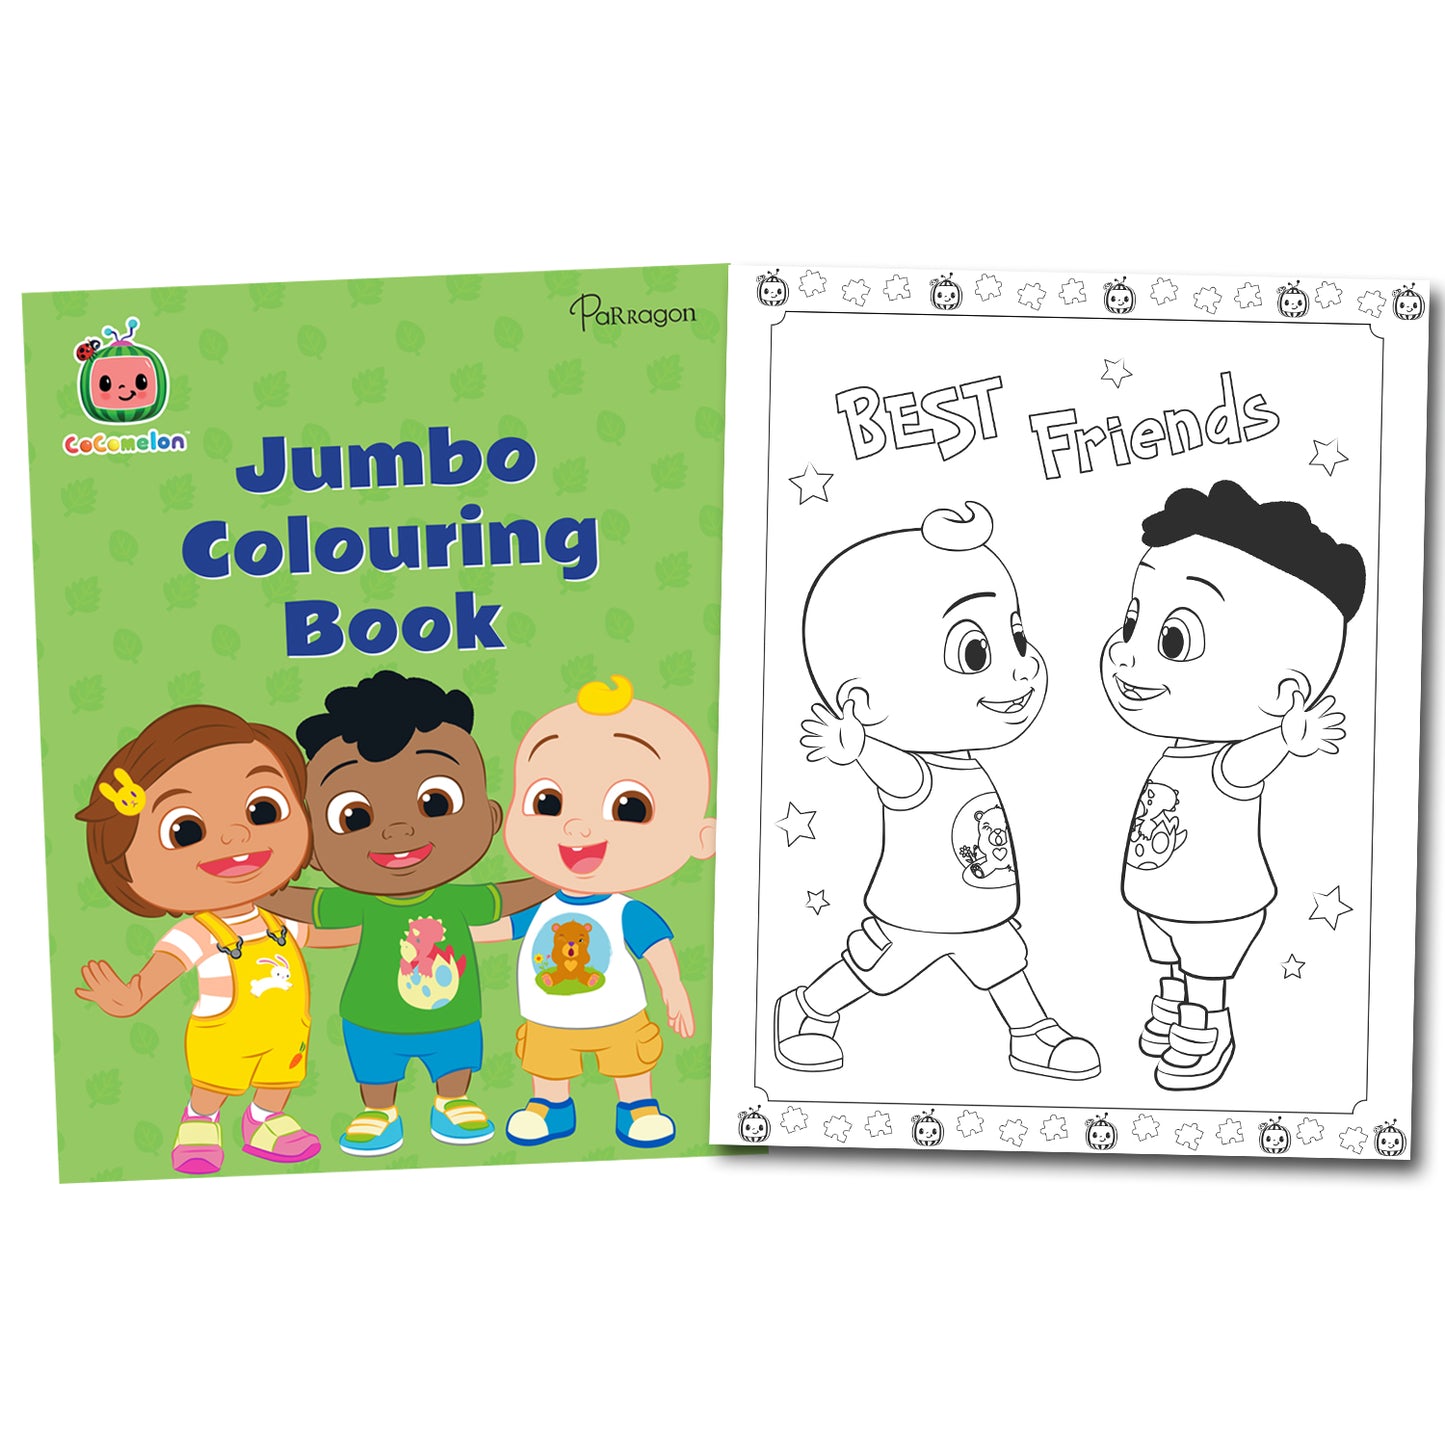 Cocomelon Fun hours with JJ Colouring, Activity & Sticker Set of 3 Books [Paperback] Parragon